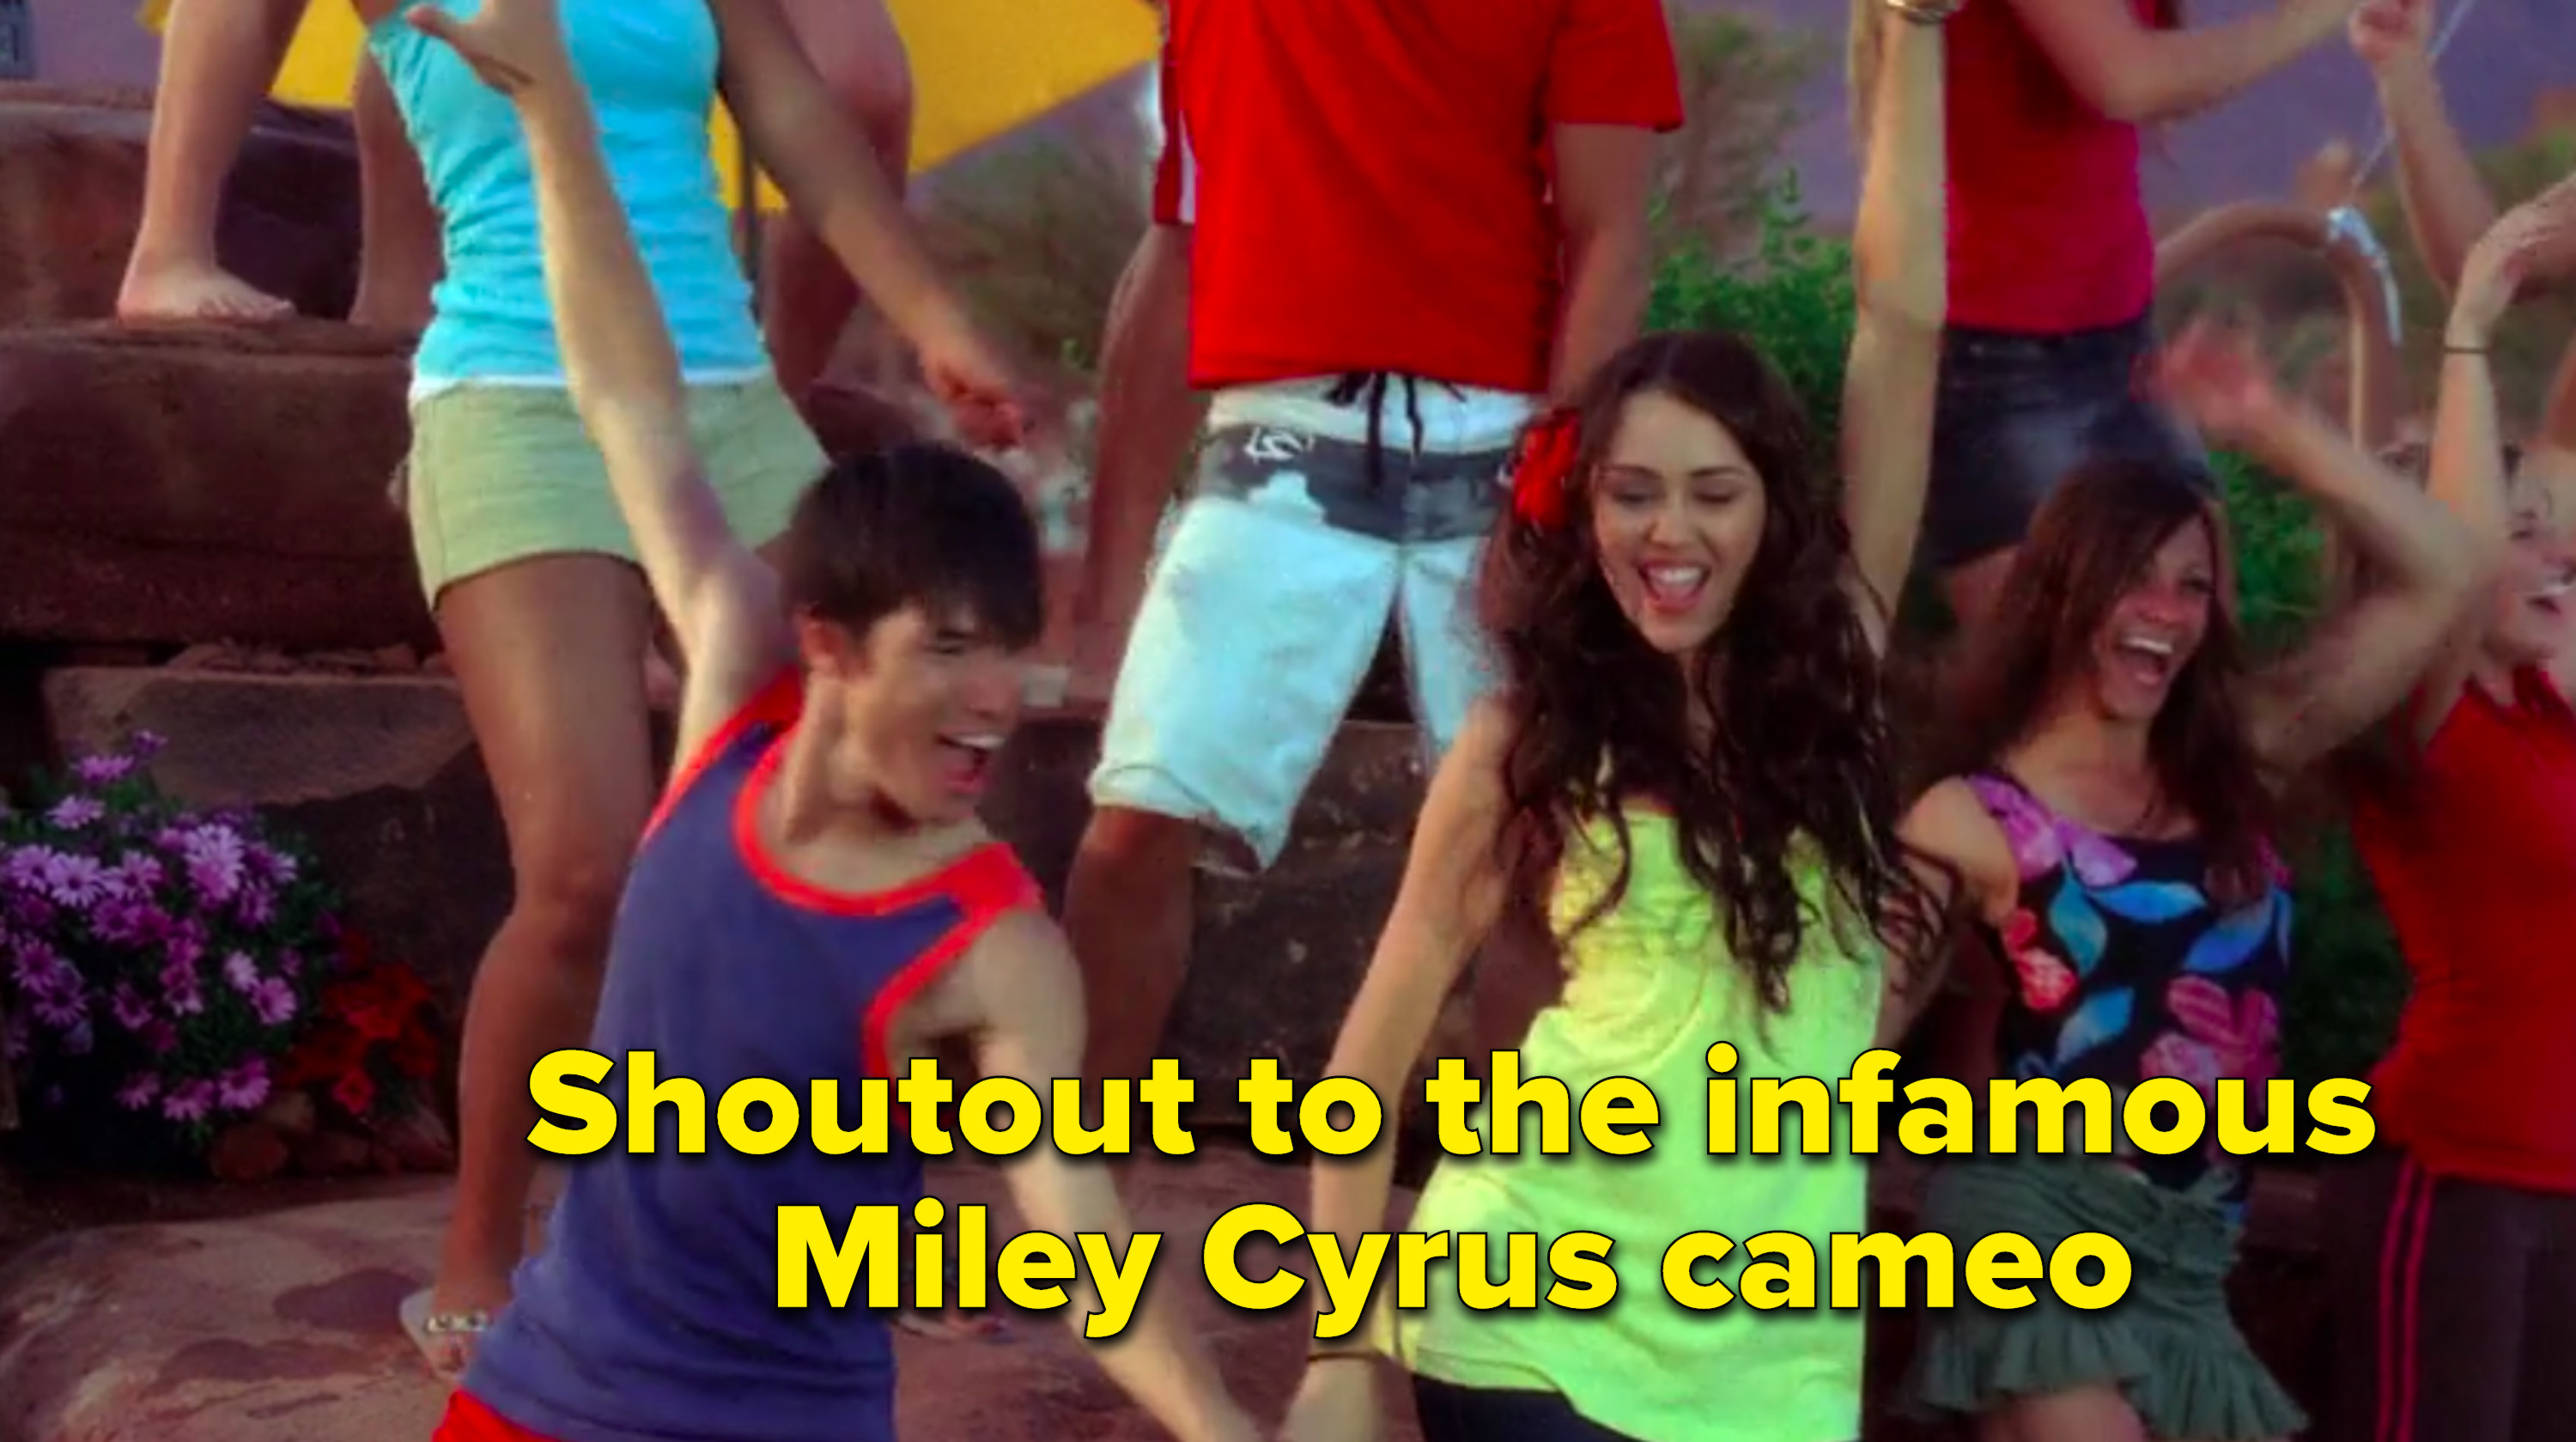 &quot;Shoutout to the infamous Miley Cyrus cameo&quot; written next to Miley Cyrus in &quot;All for One&quot;